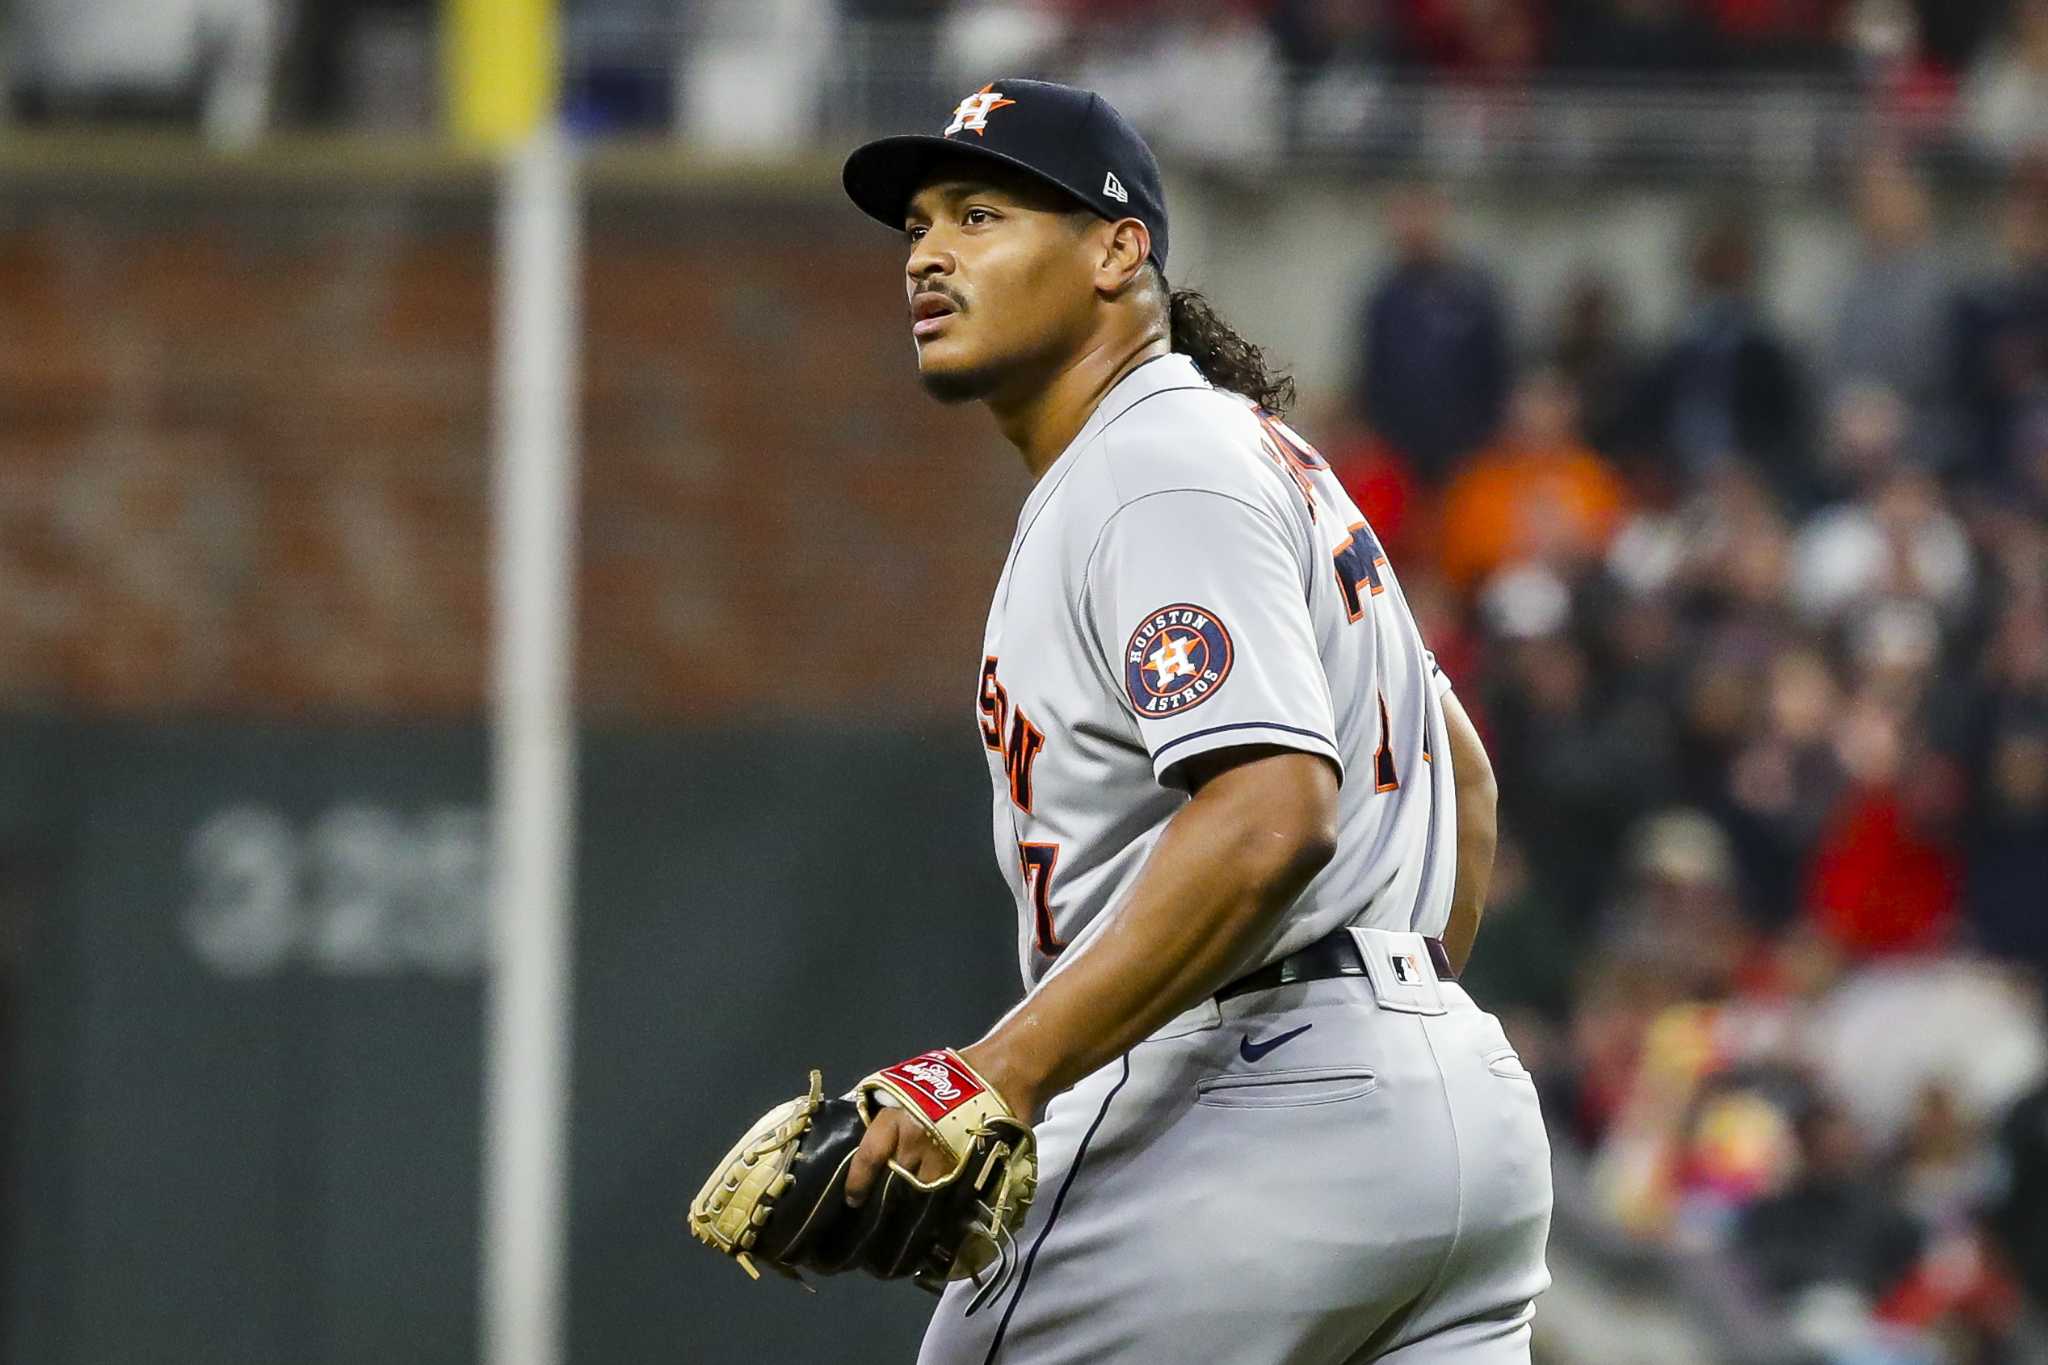 World Series 2021: Braves shut out Astros in Game 3